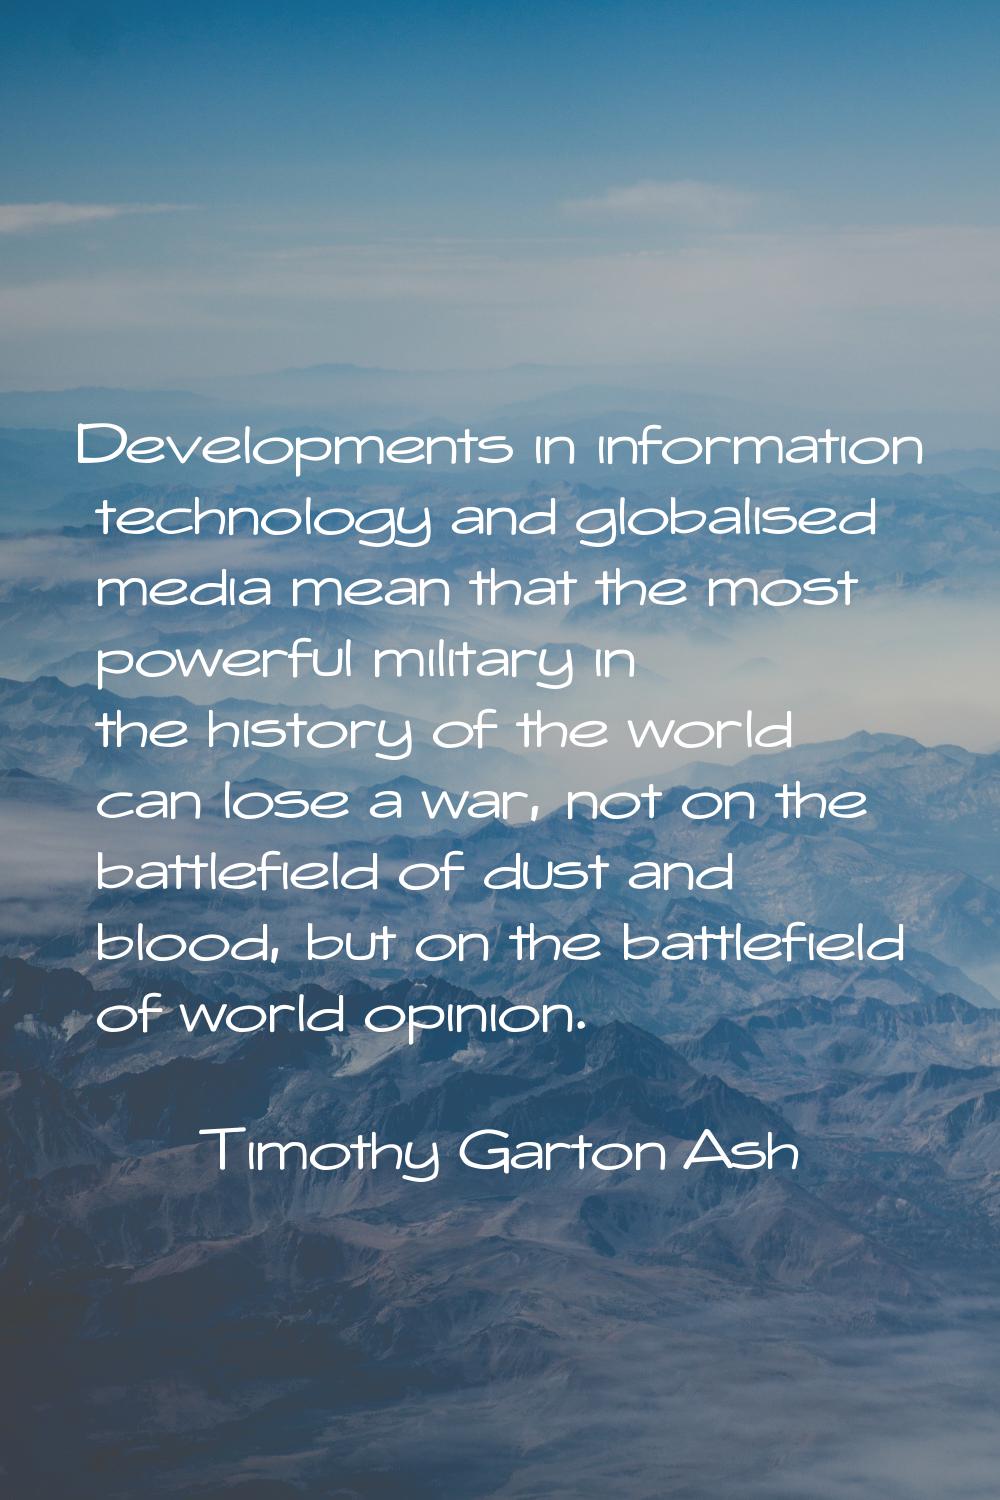 Developments in information technology and globalised media mean that the most powerful military in